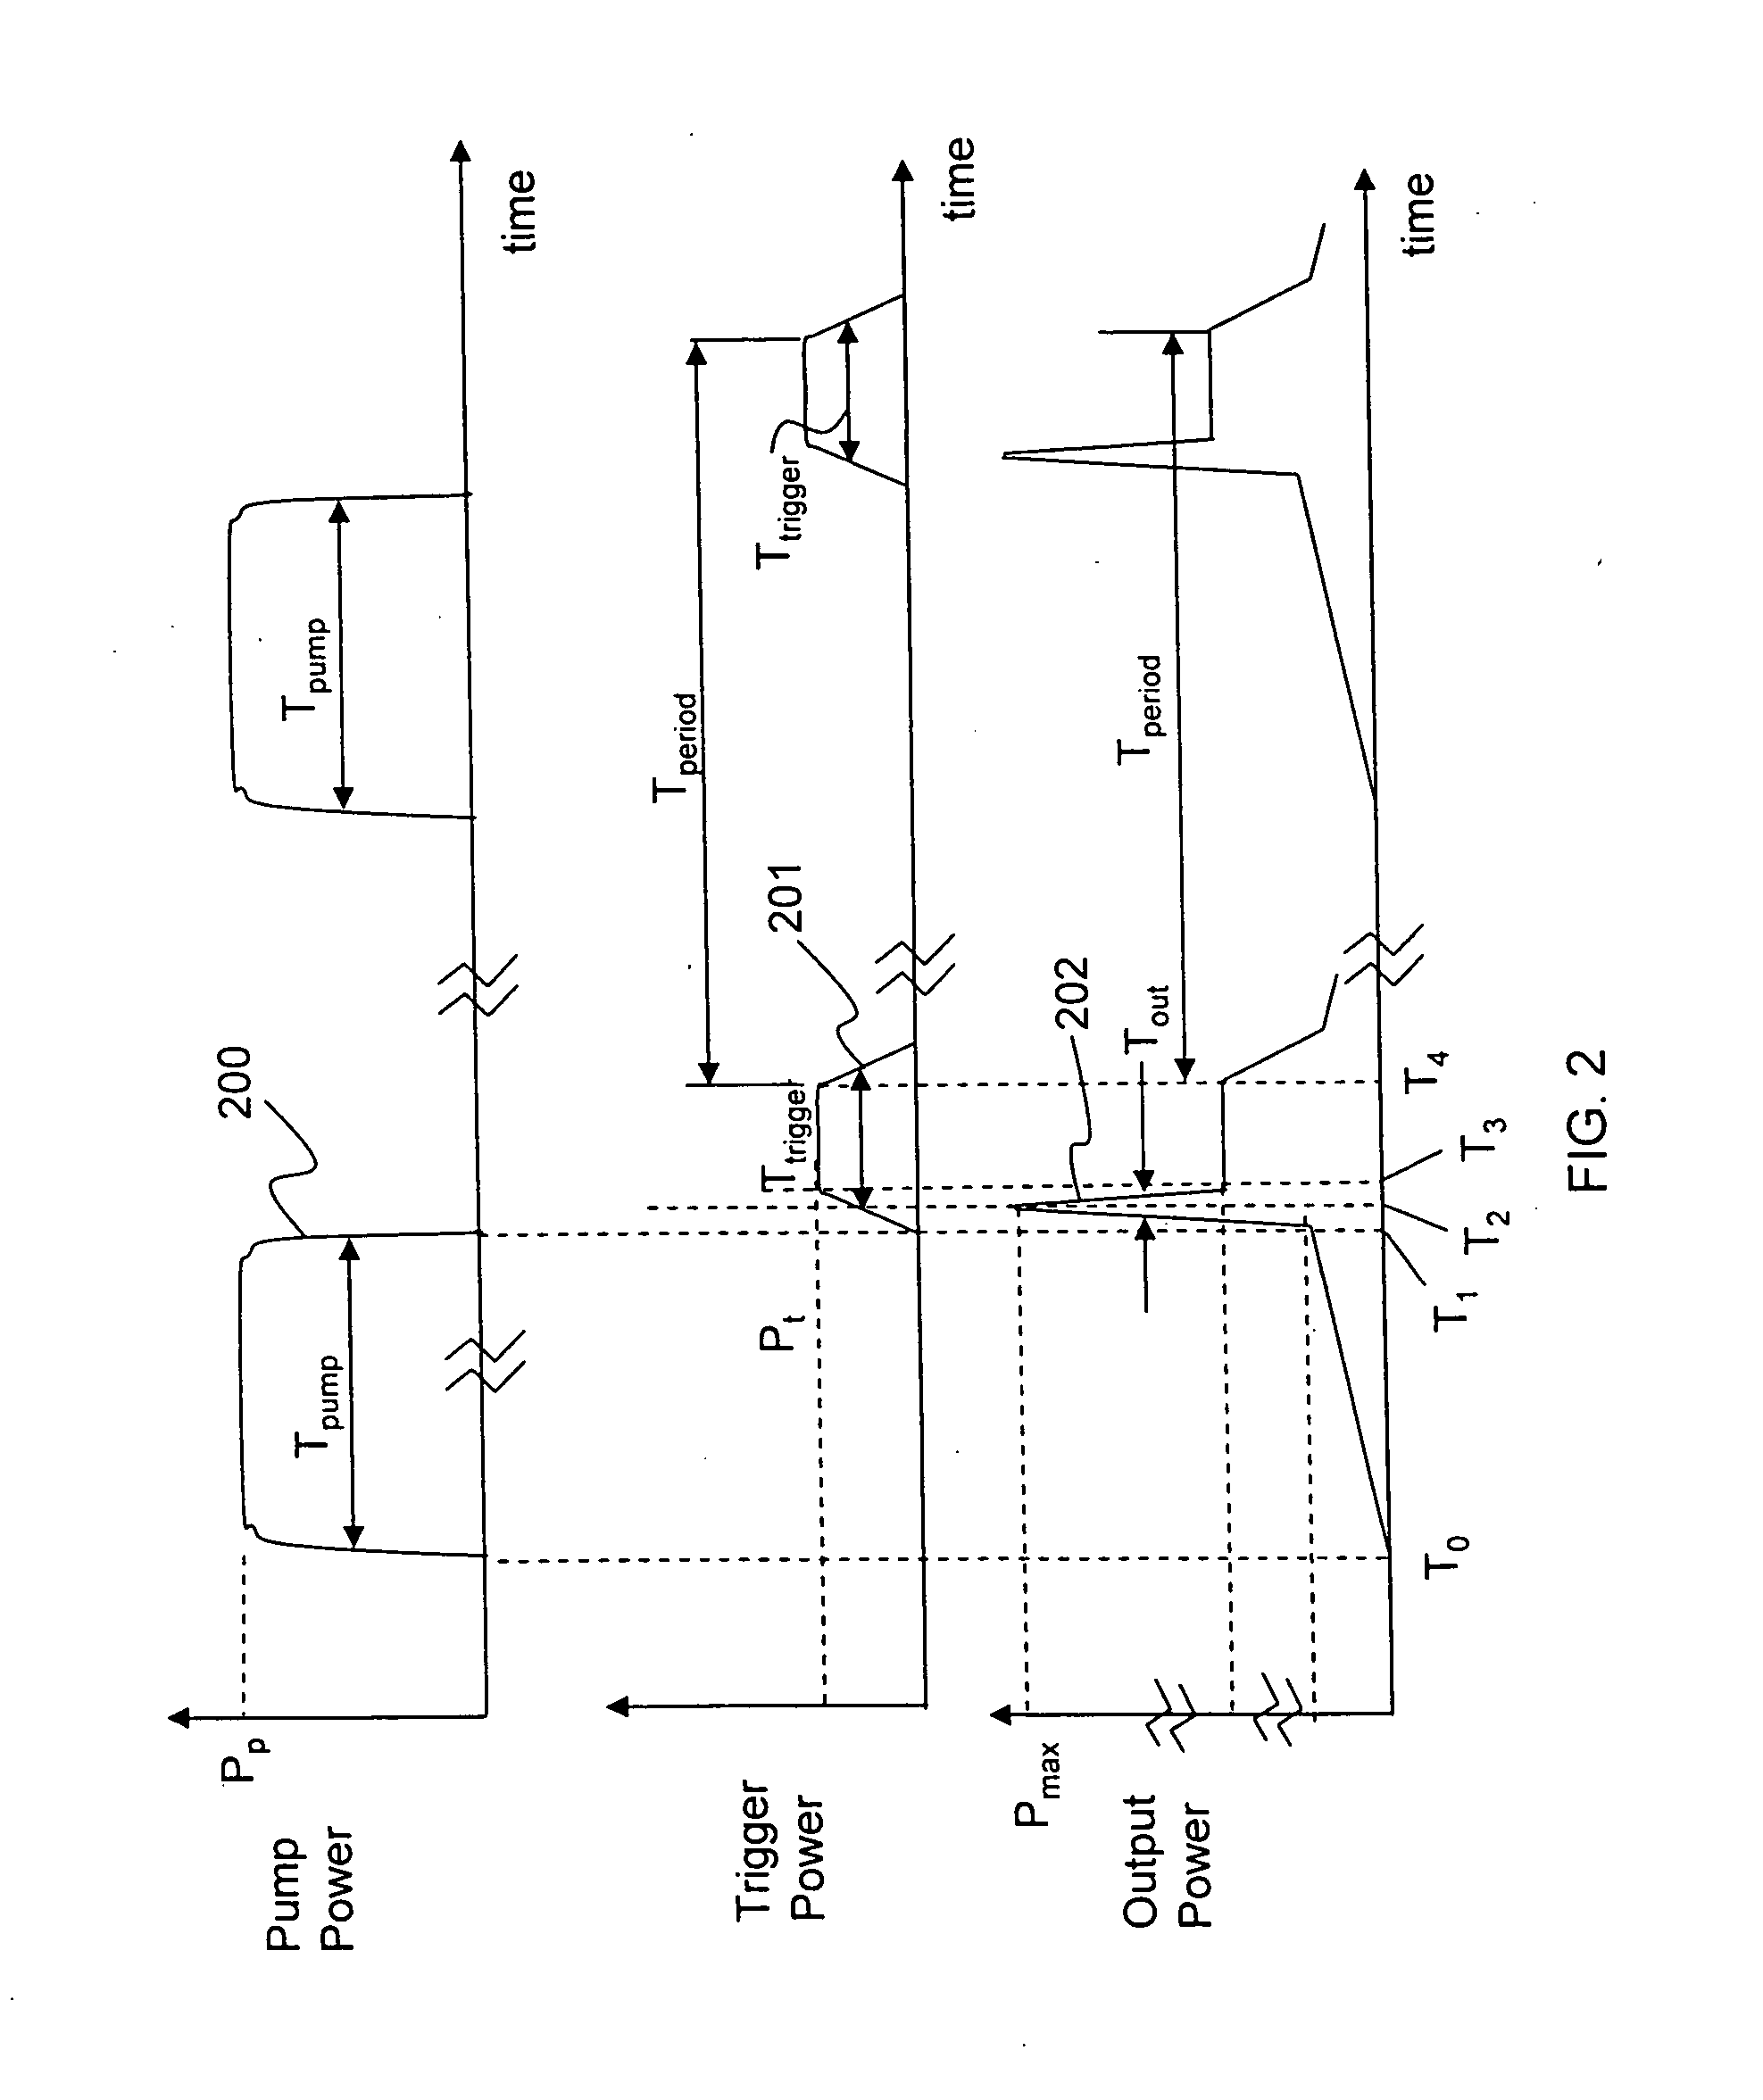 Apparatus and method for generating short optical pulses